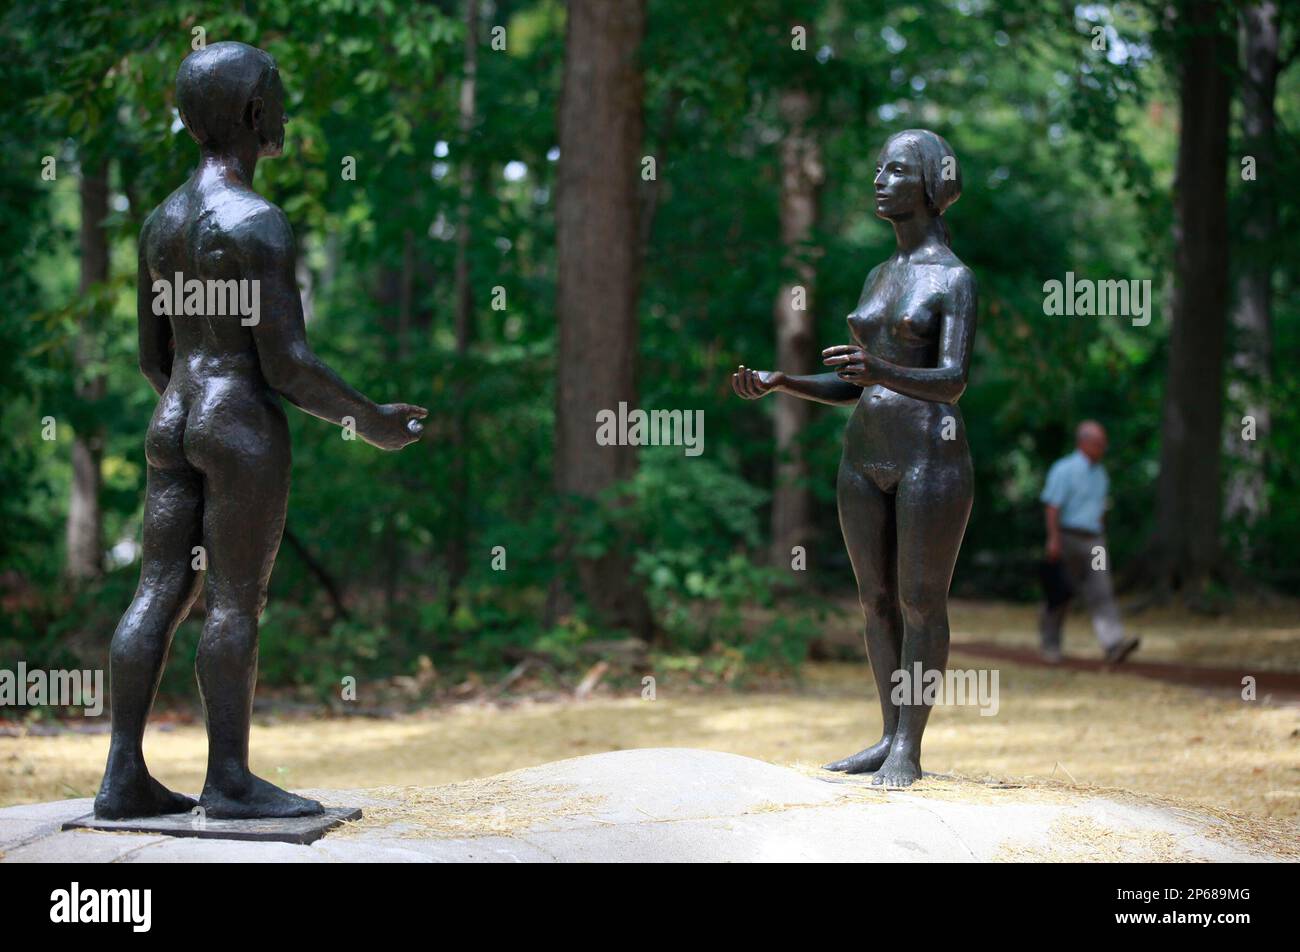 The Space Between Adam and Eve,” a sculpture by Jean Paul Darriau, is back in place on the east side of Dunns Woods on the Indiana University campus in Bloomington, Ind